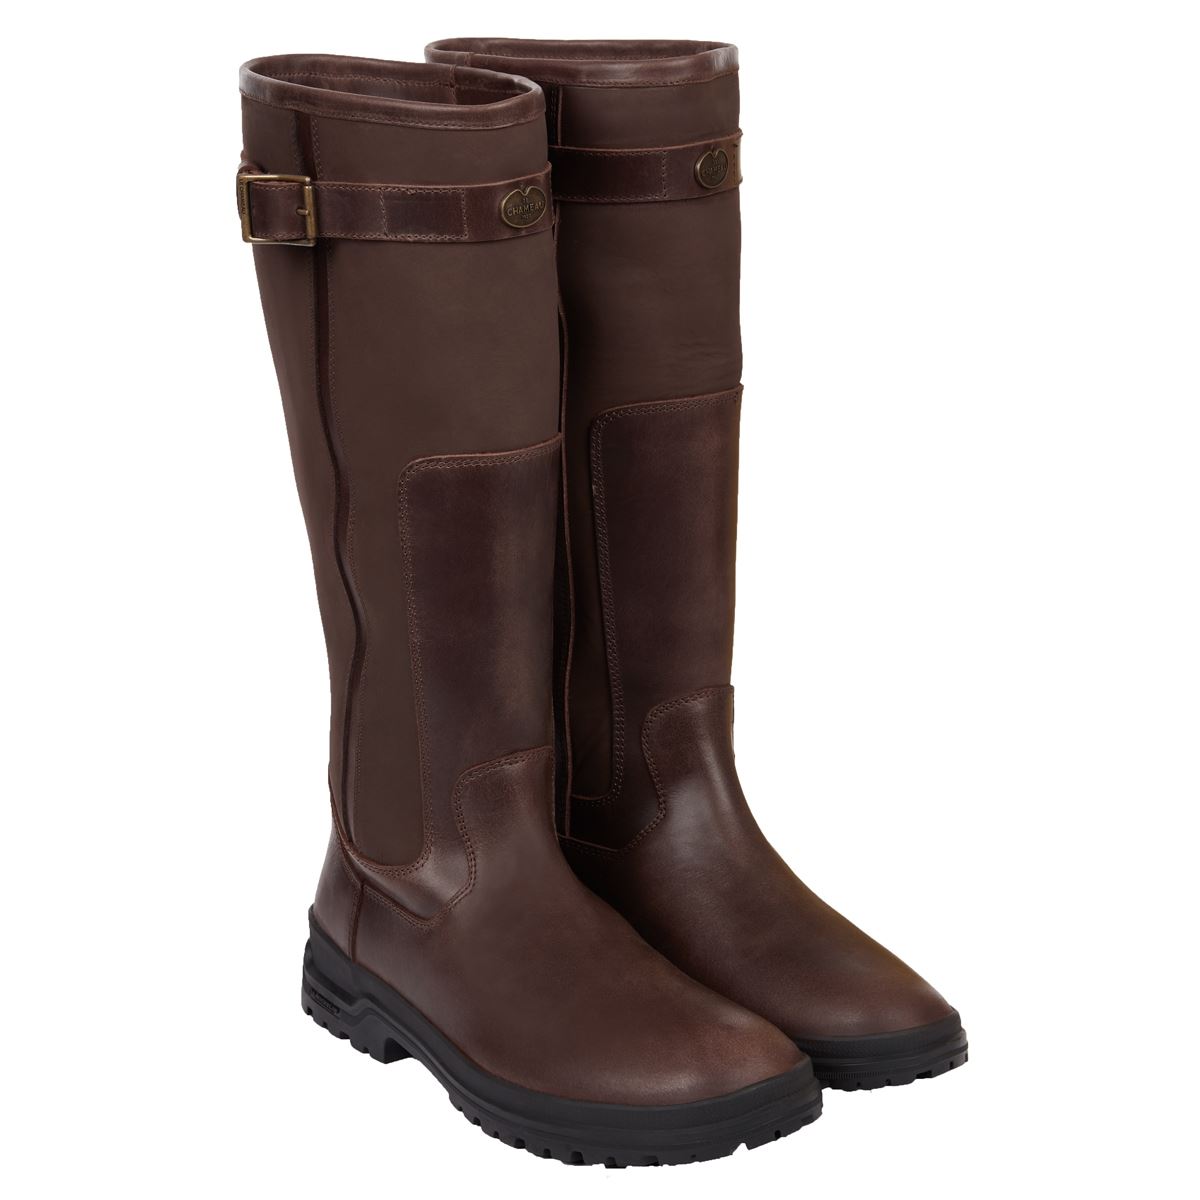 Is the le chameau jameson boot ideal for year-round walks?